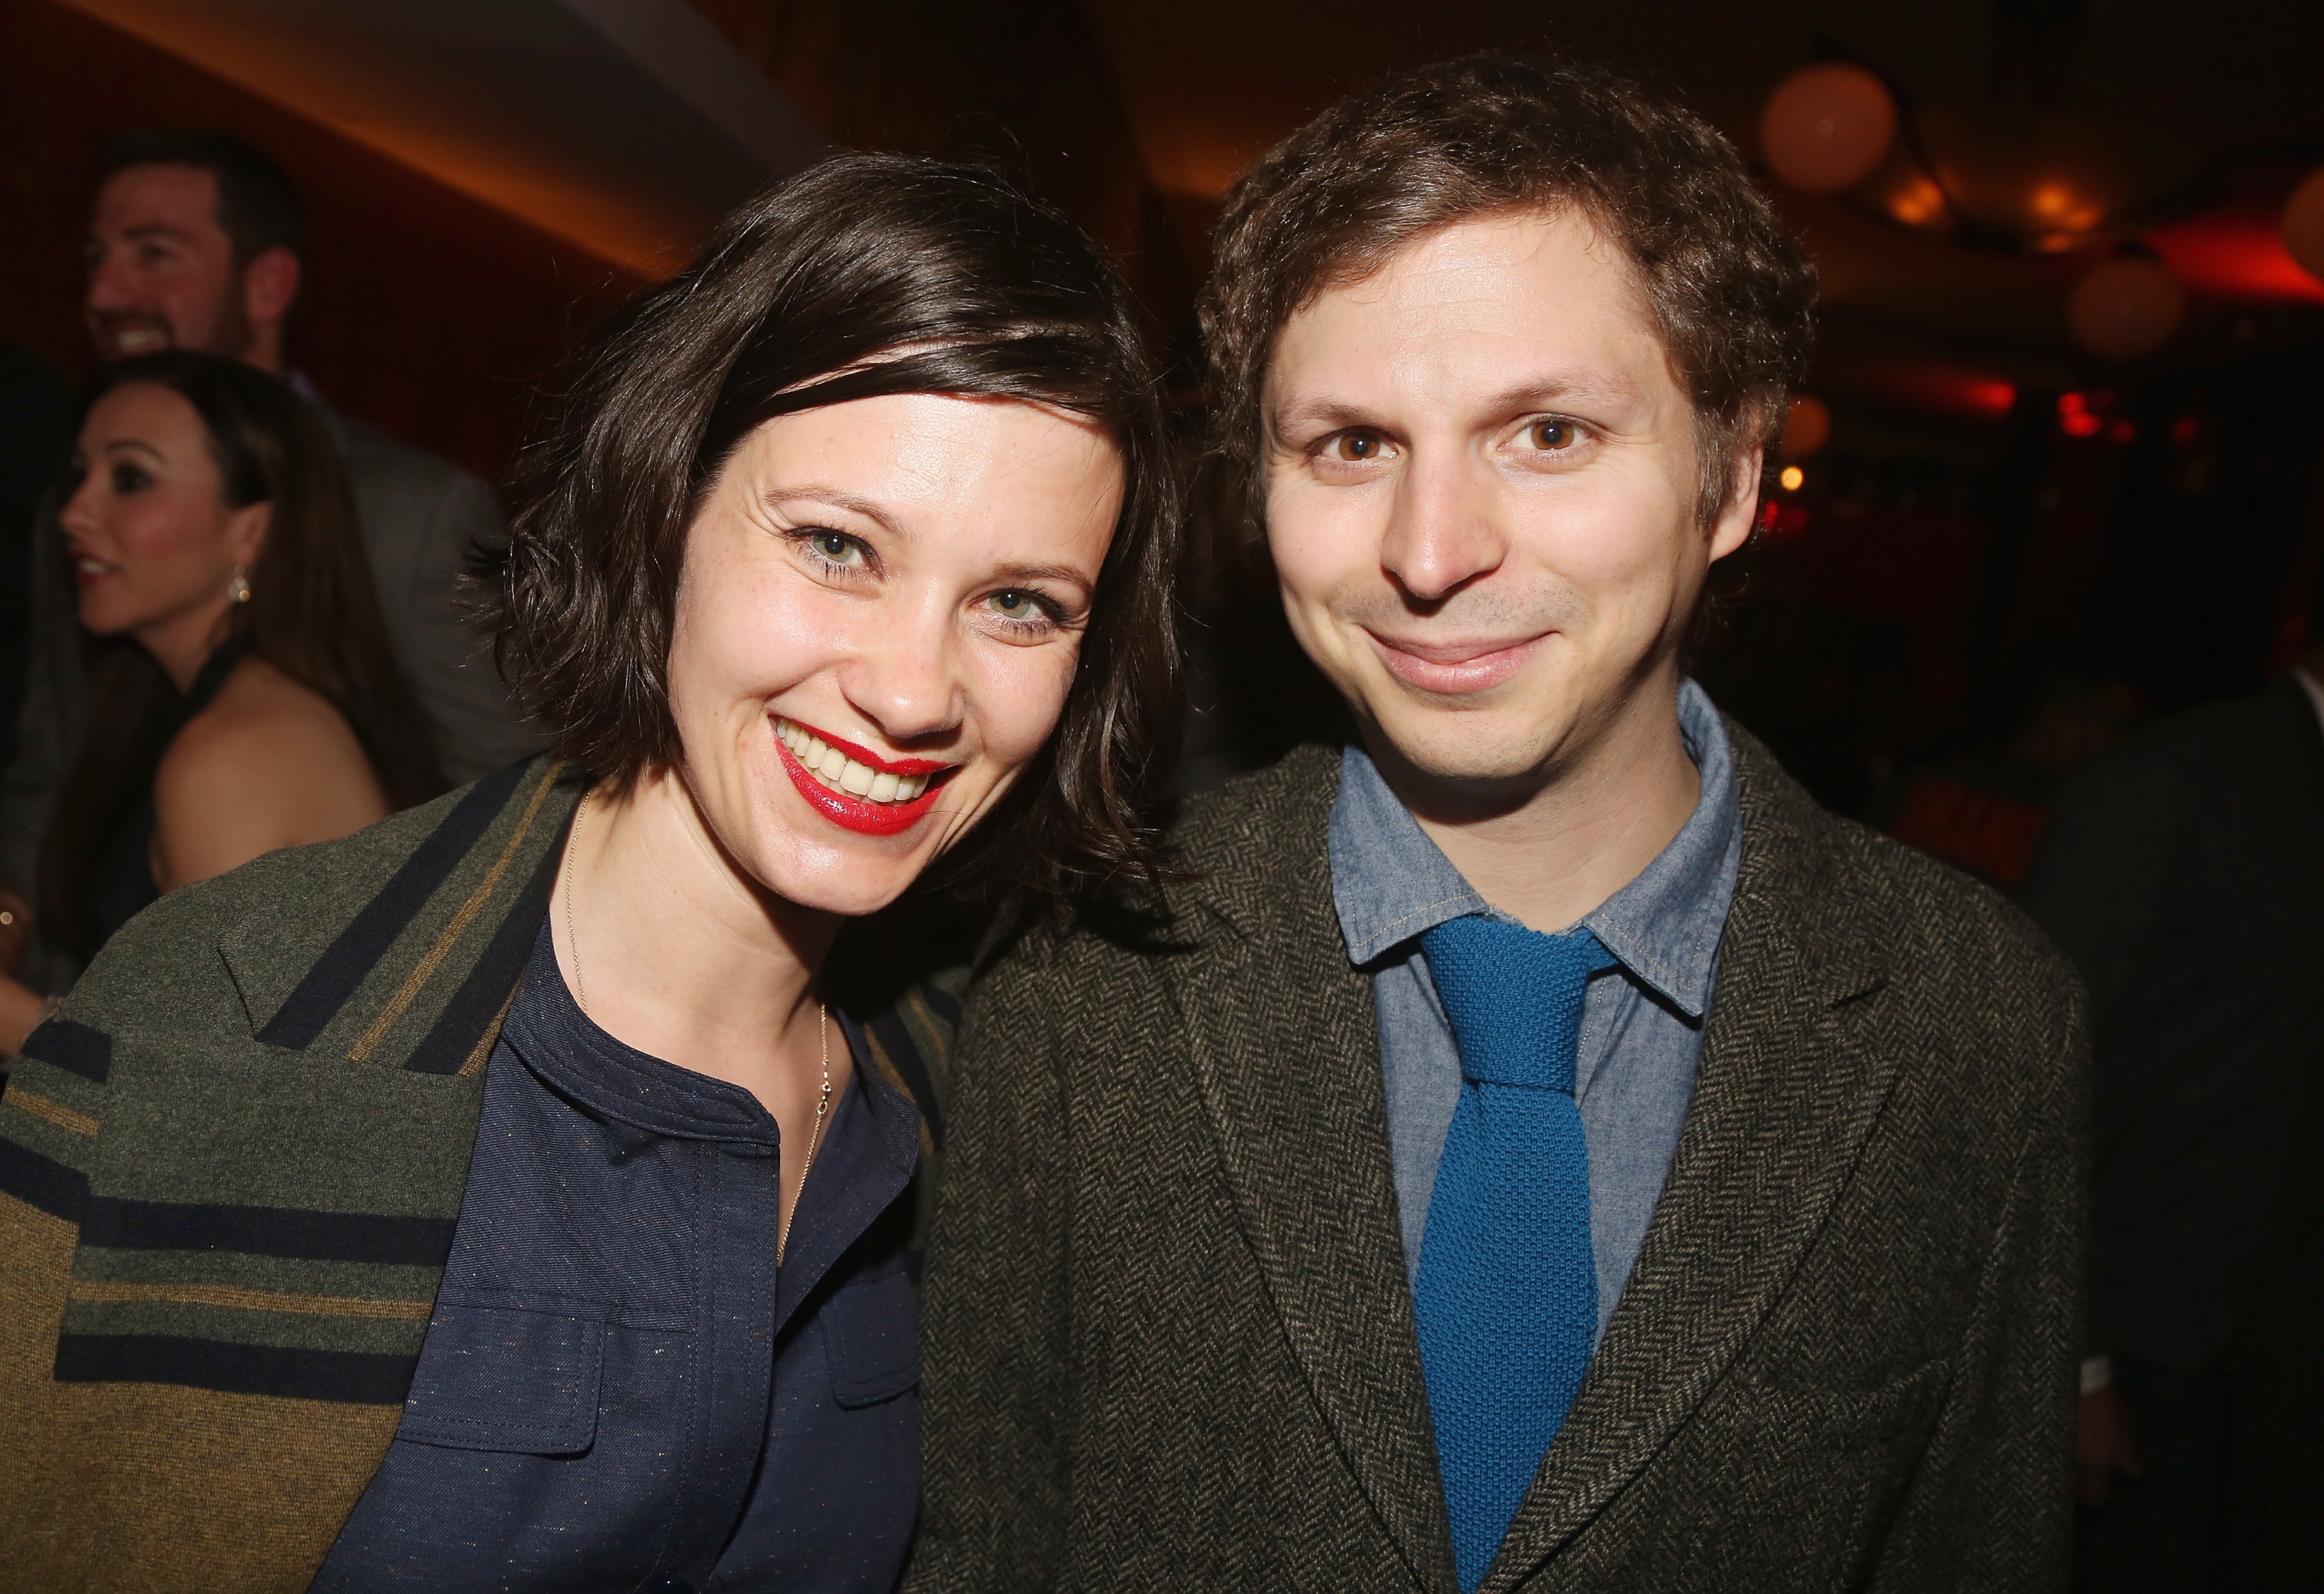 Michael Cera and his wife